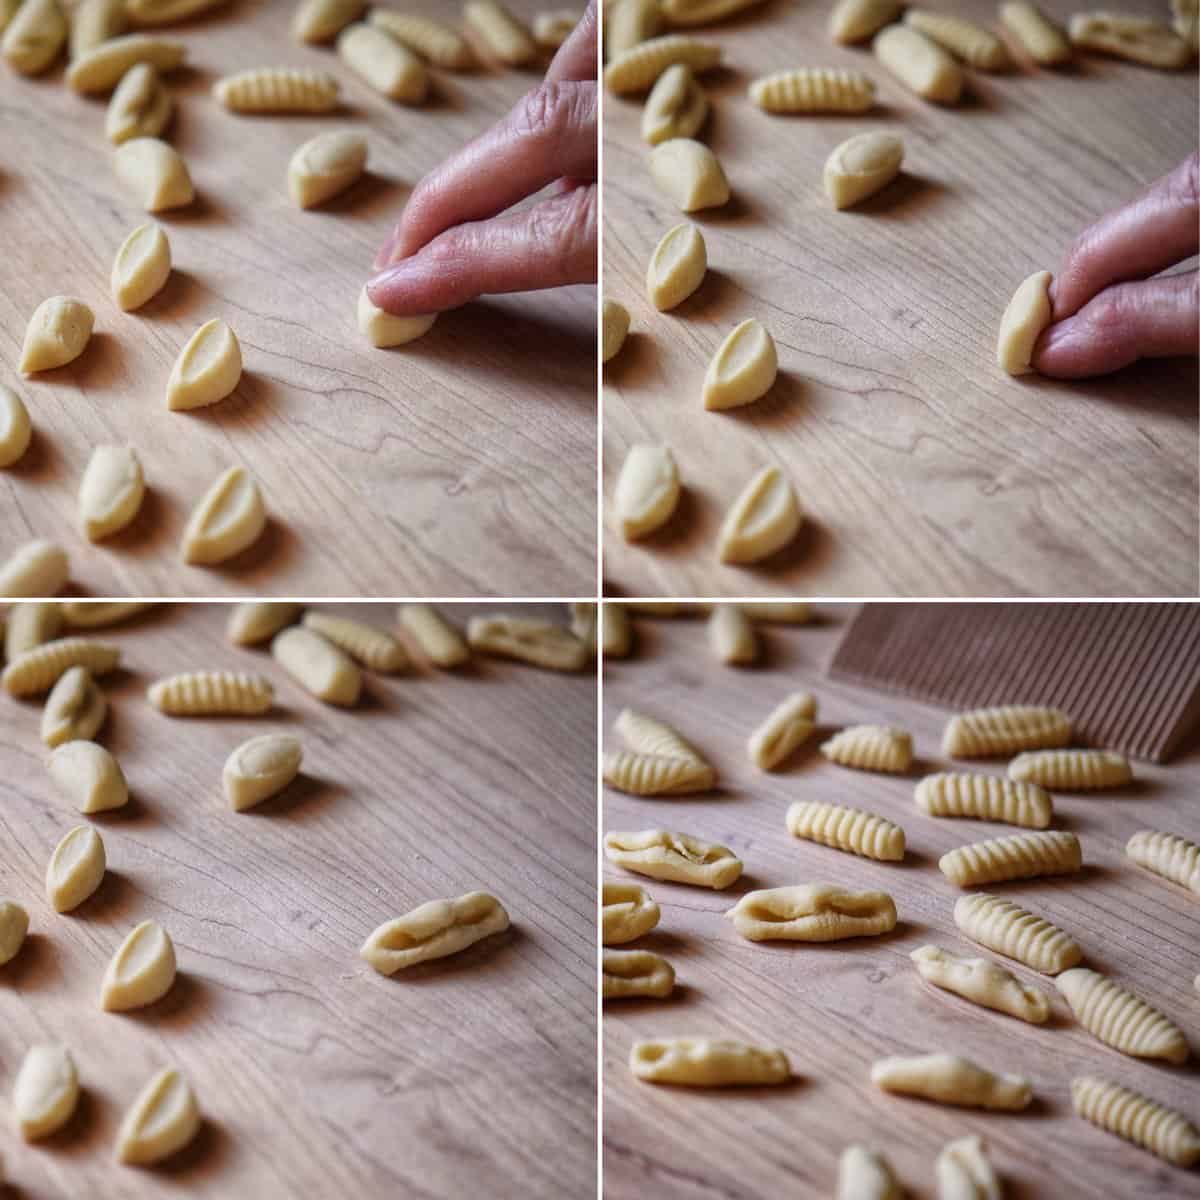 Cavatelli Pasta from Scratch - The Slow Roasted Italian